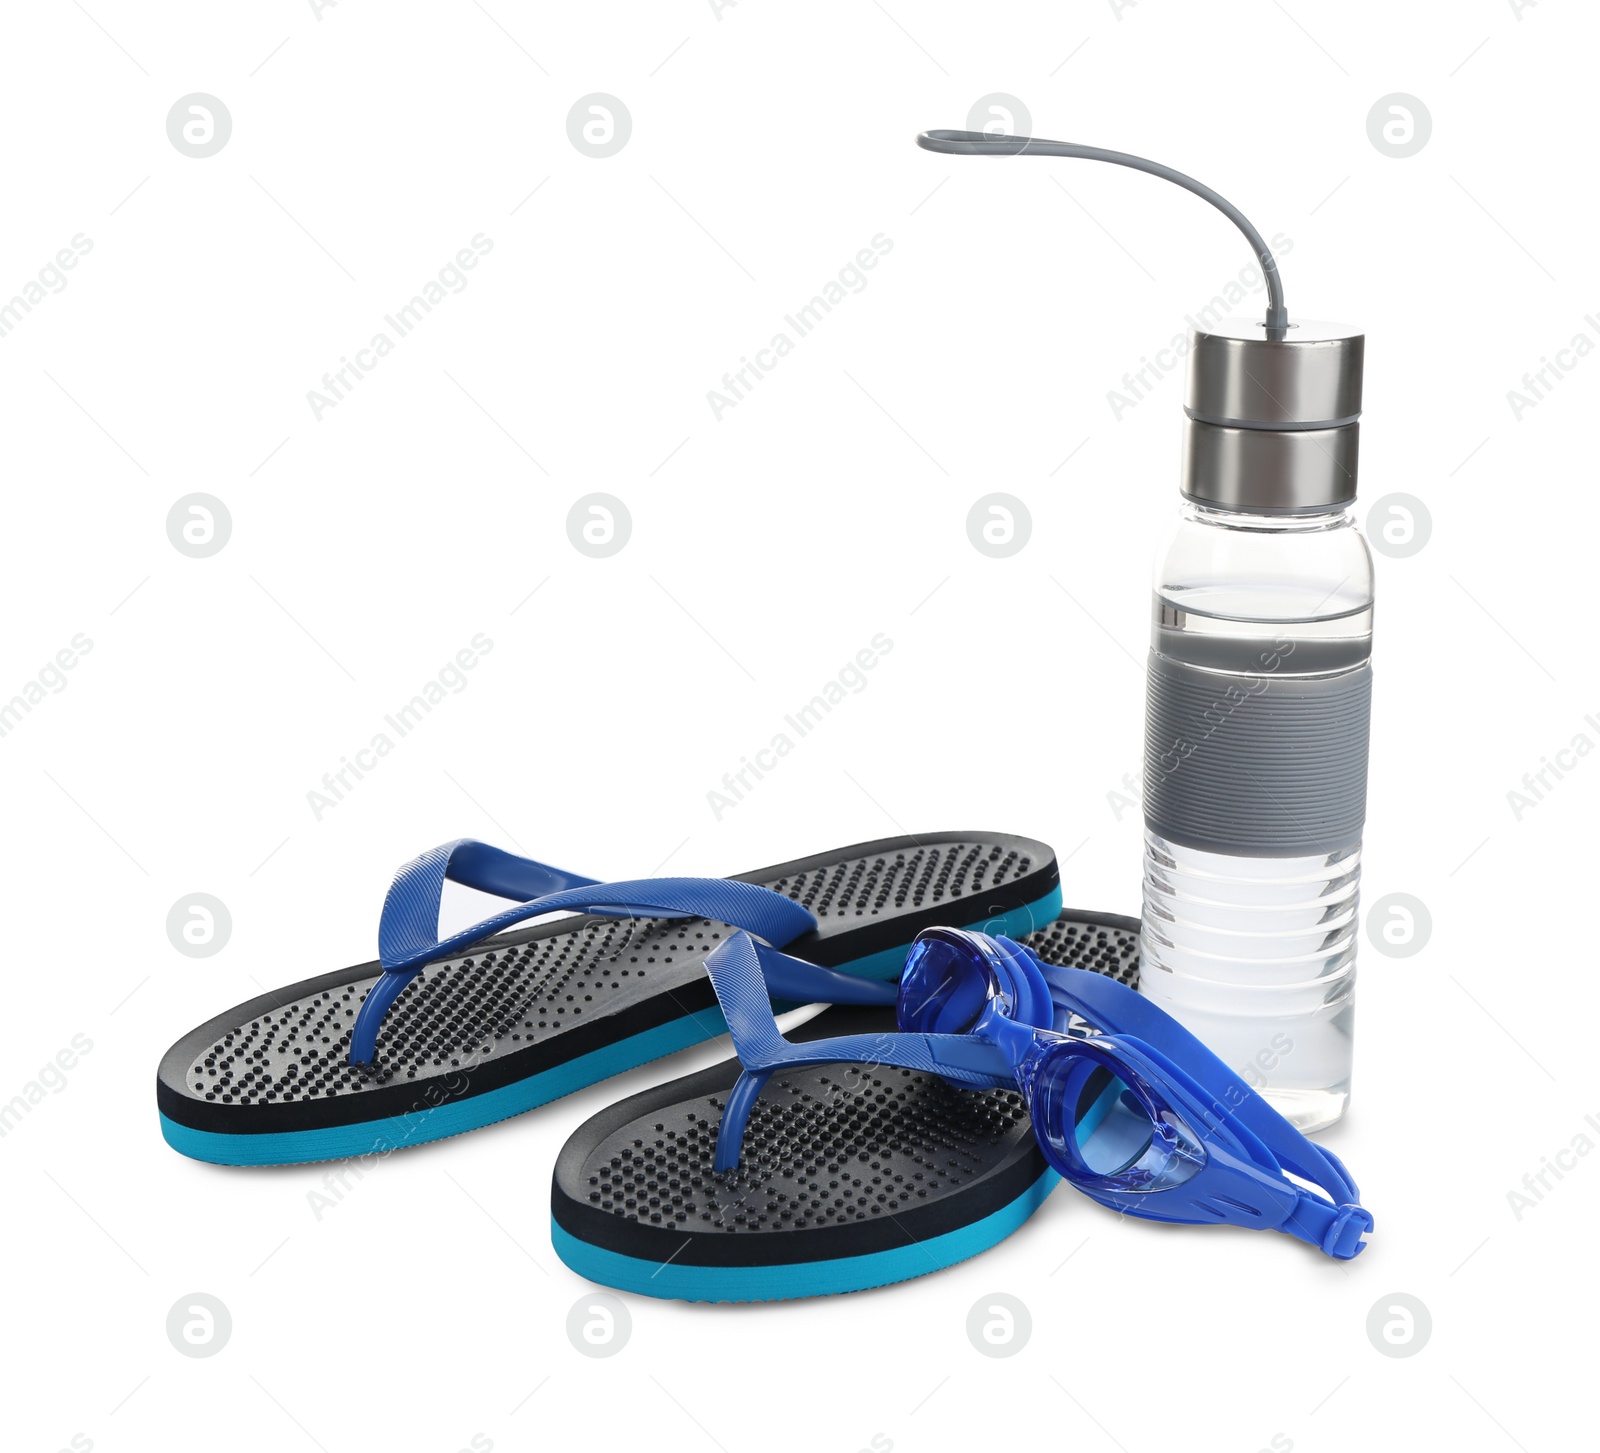 Photo of Swimming goggles, water bottle and flip flops isolated on white